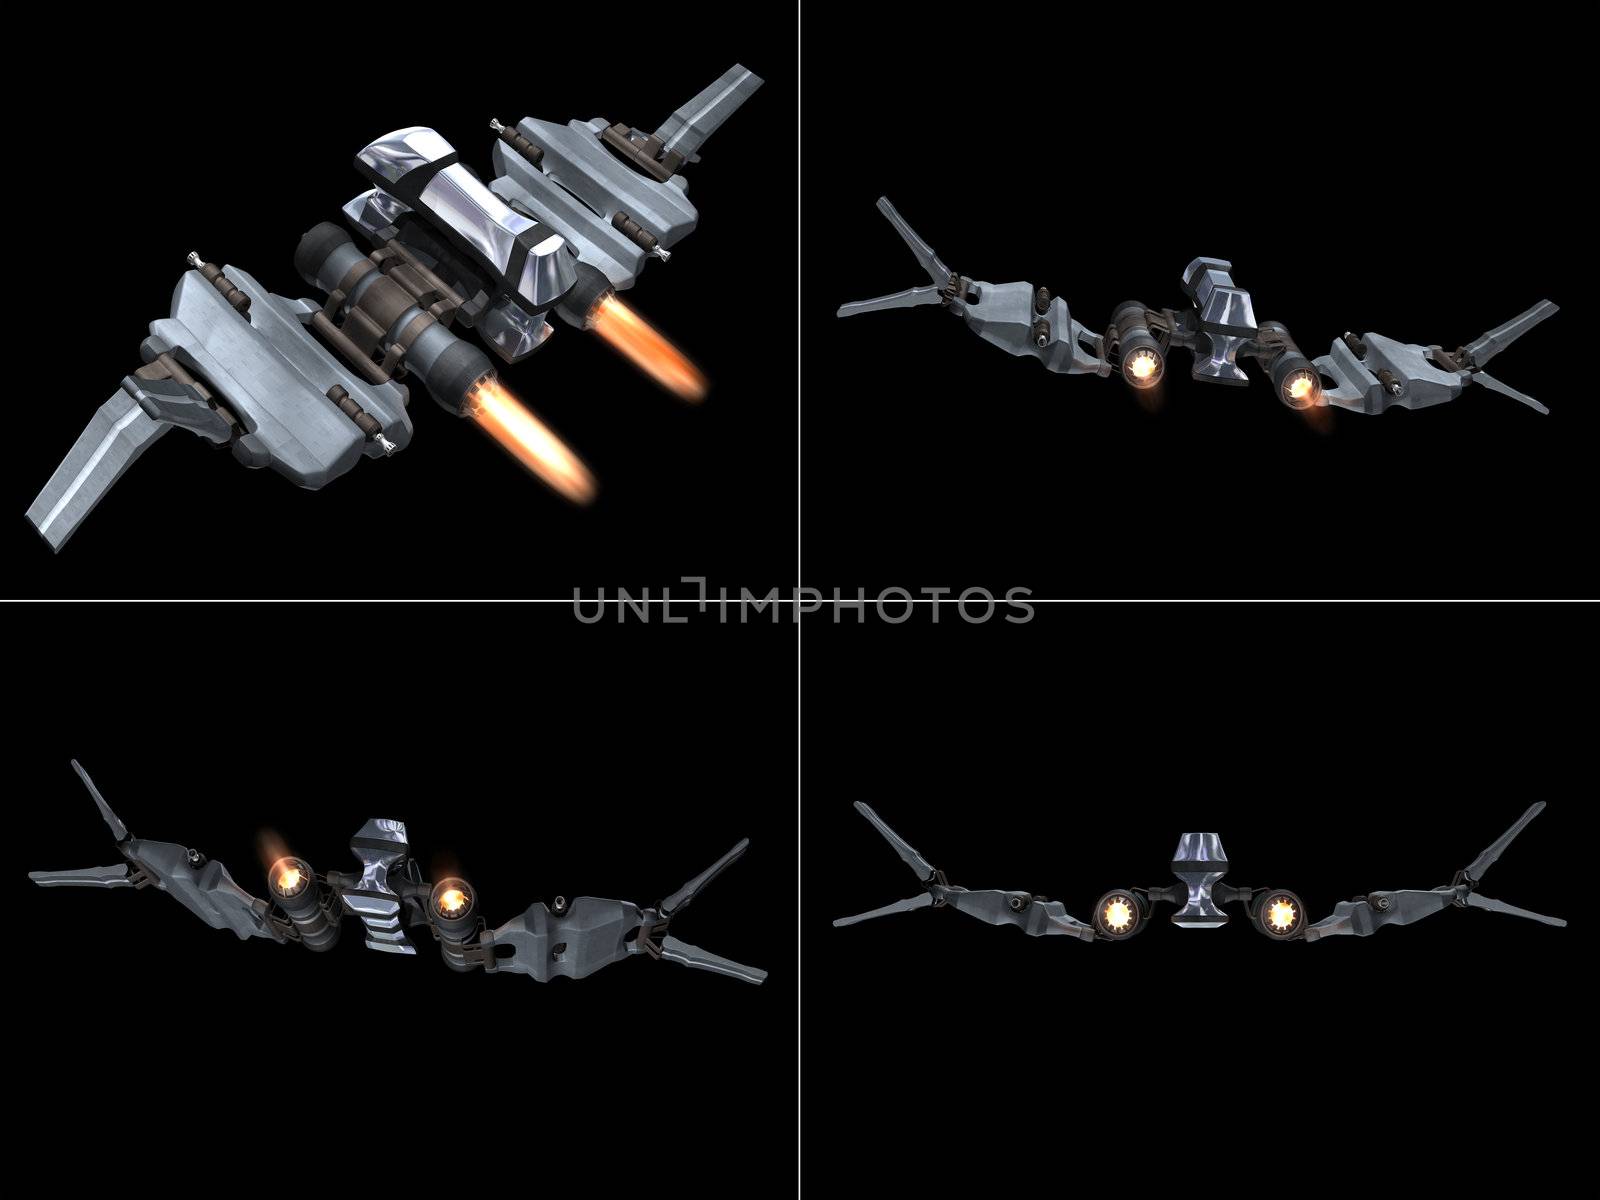 Four back views of a StarFighter in action by shkyo30